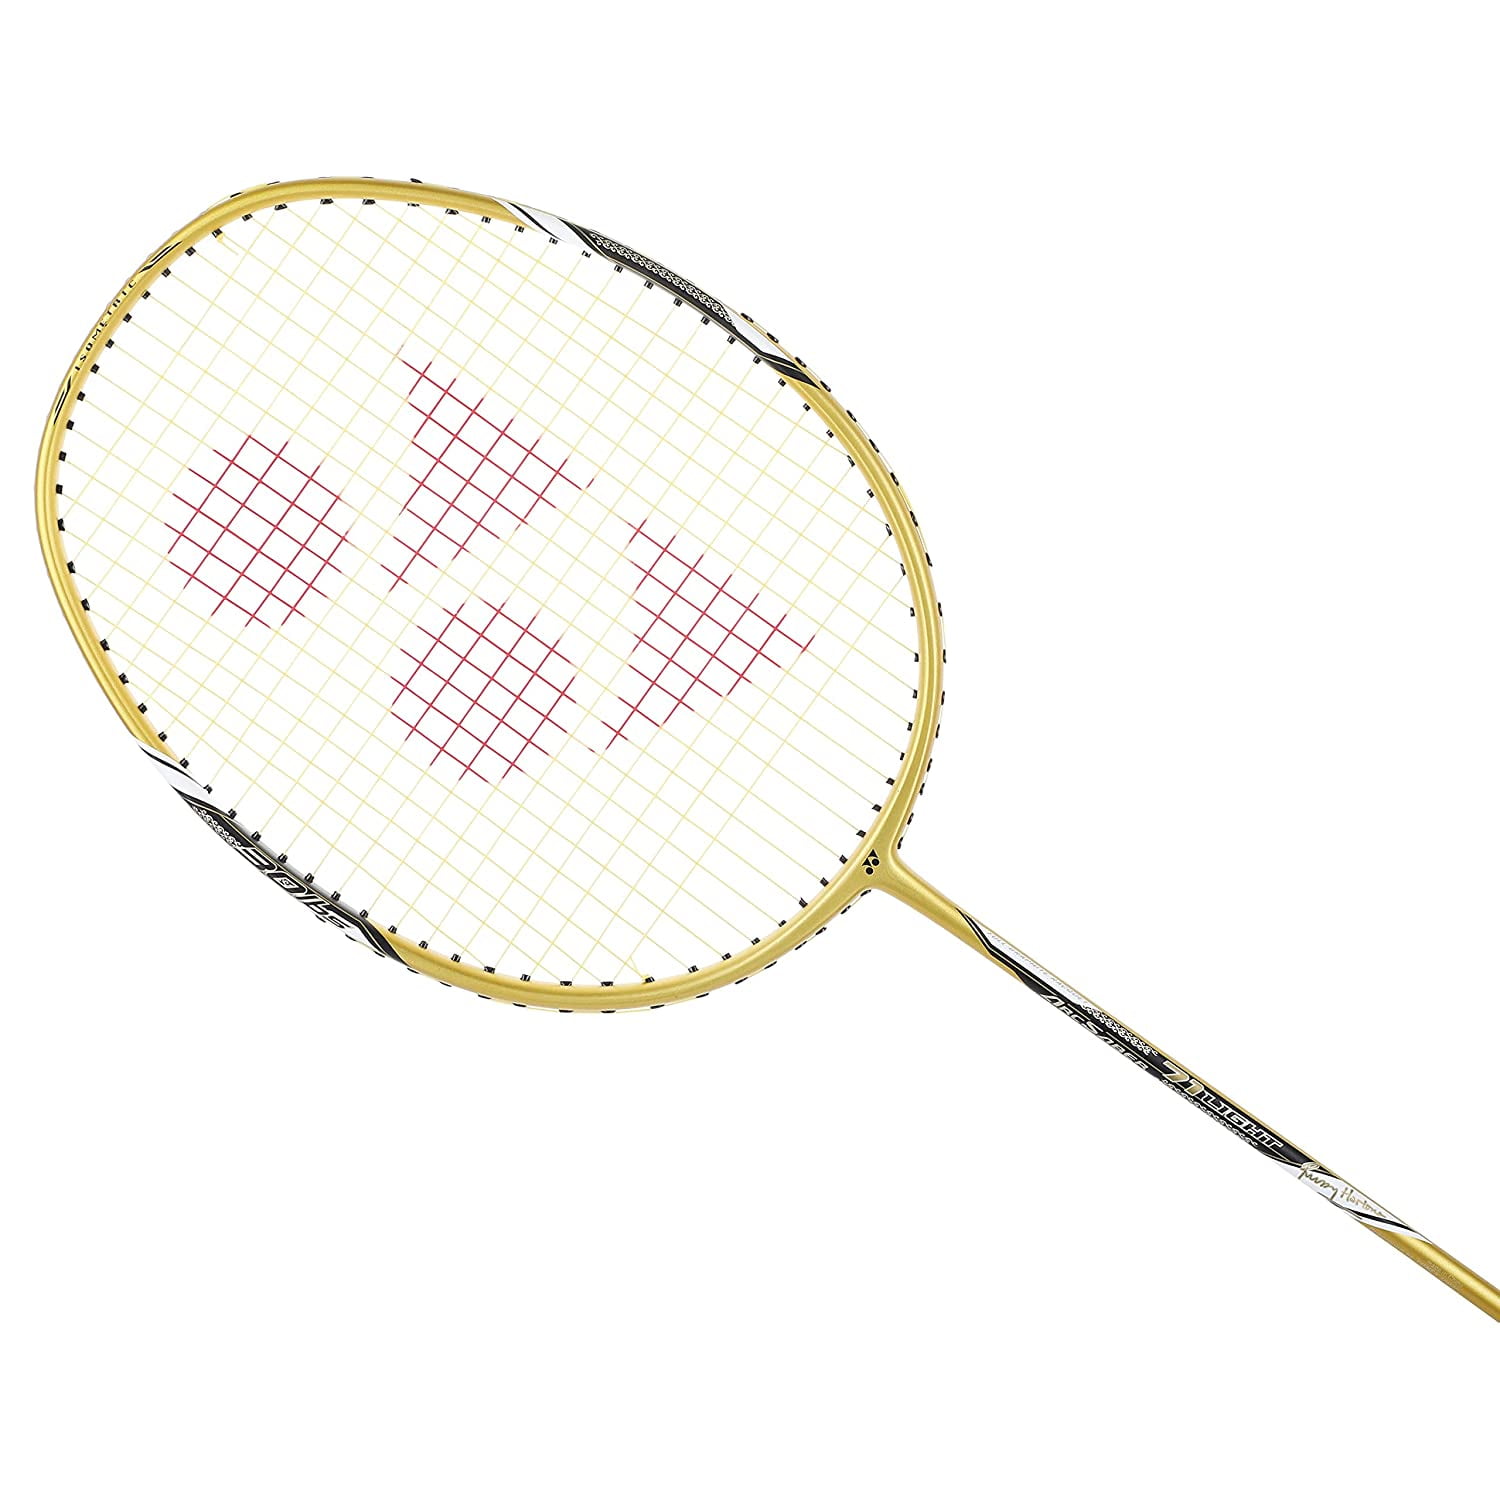 Yonex Arcsaber 71 Light Gold Badminton Raquet with free Full Cover (77 grams, 30 lbs Tension)